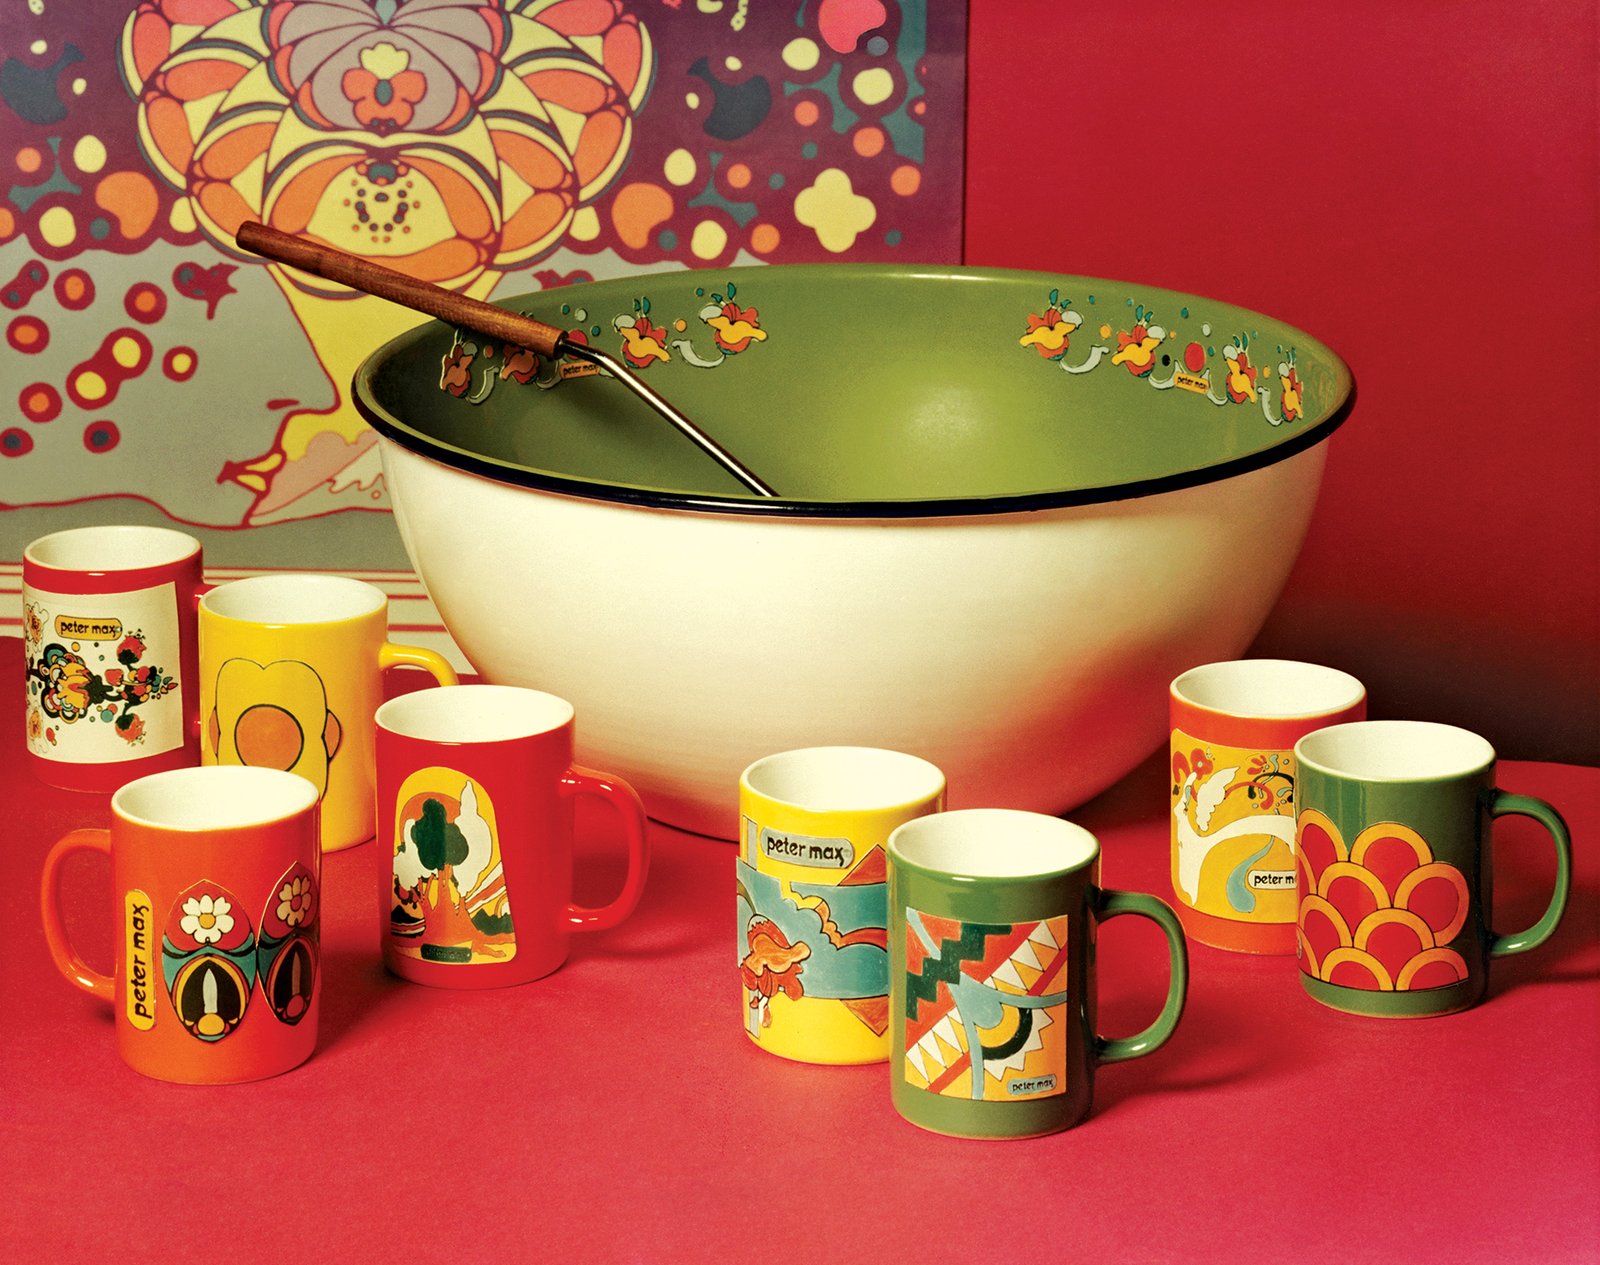 Bowl and mugs designed by Peter Max